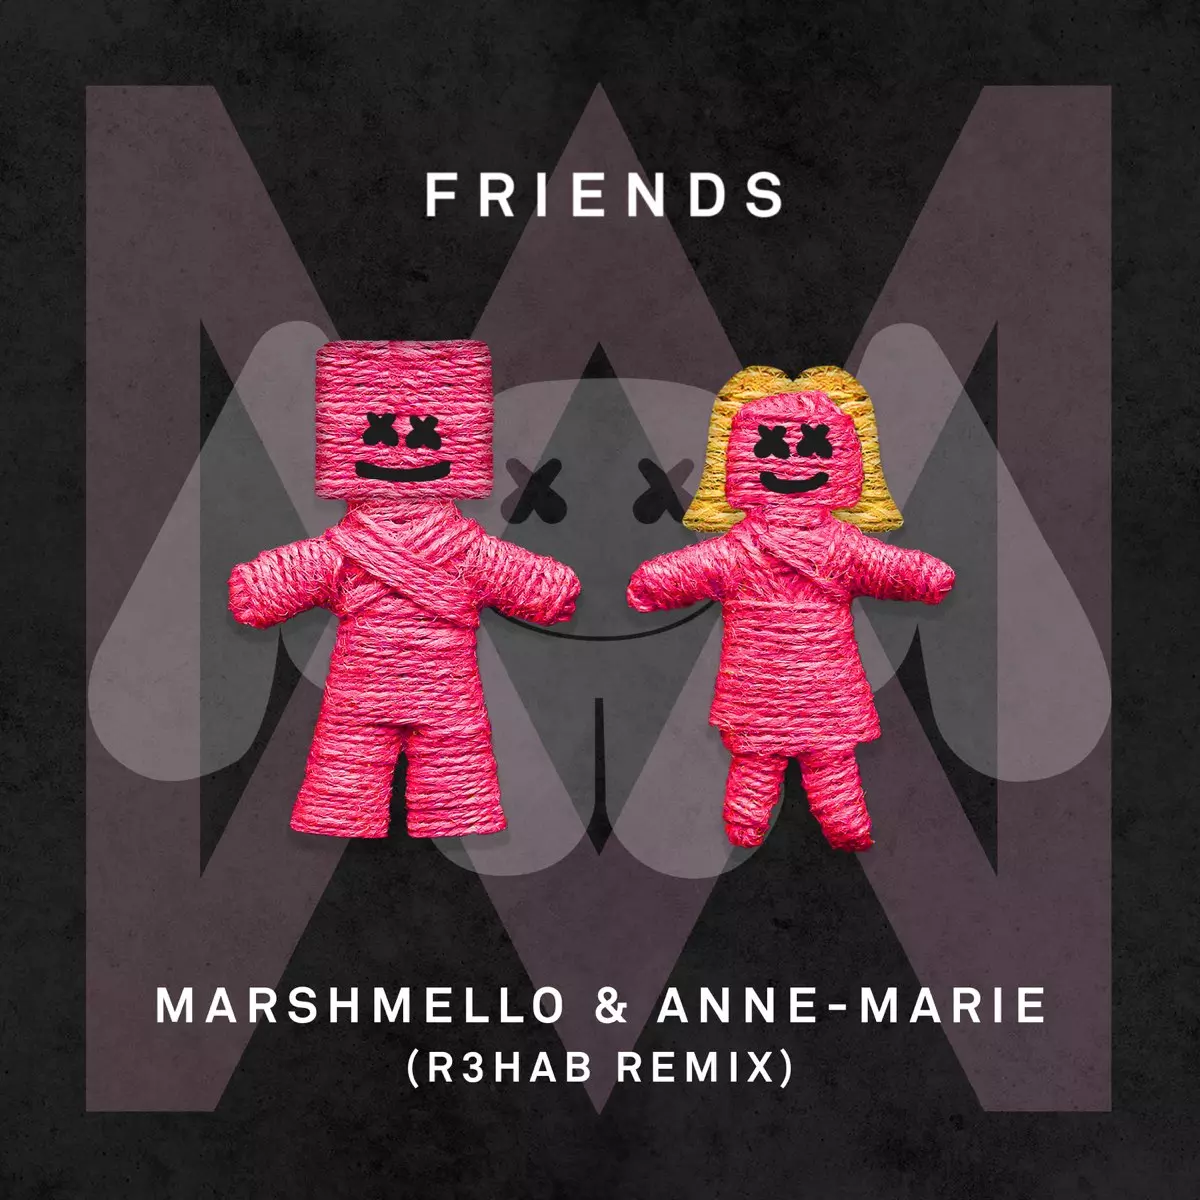 FRIENDS (R3hab Remix) - Single by Marshmello & Anne-Marie on Apple Music